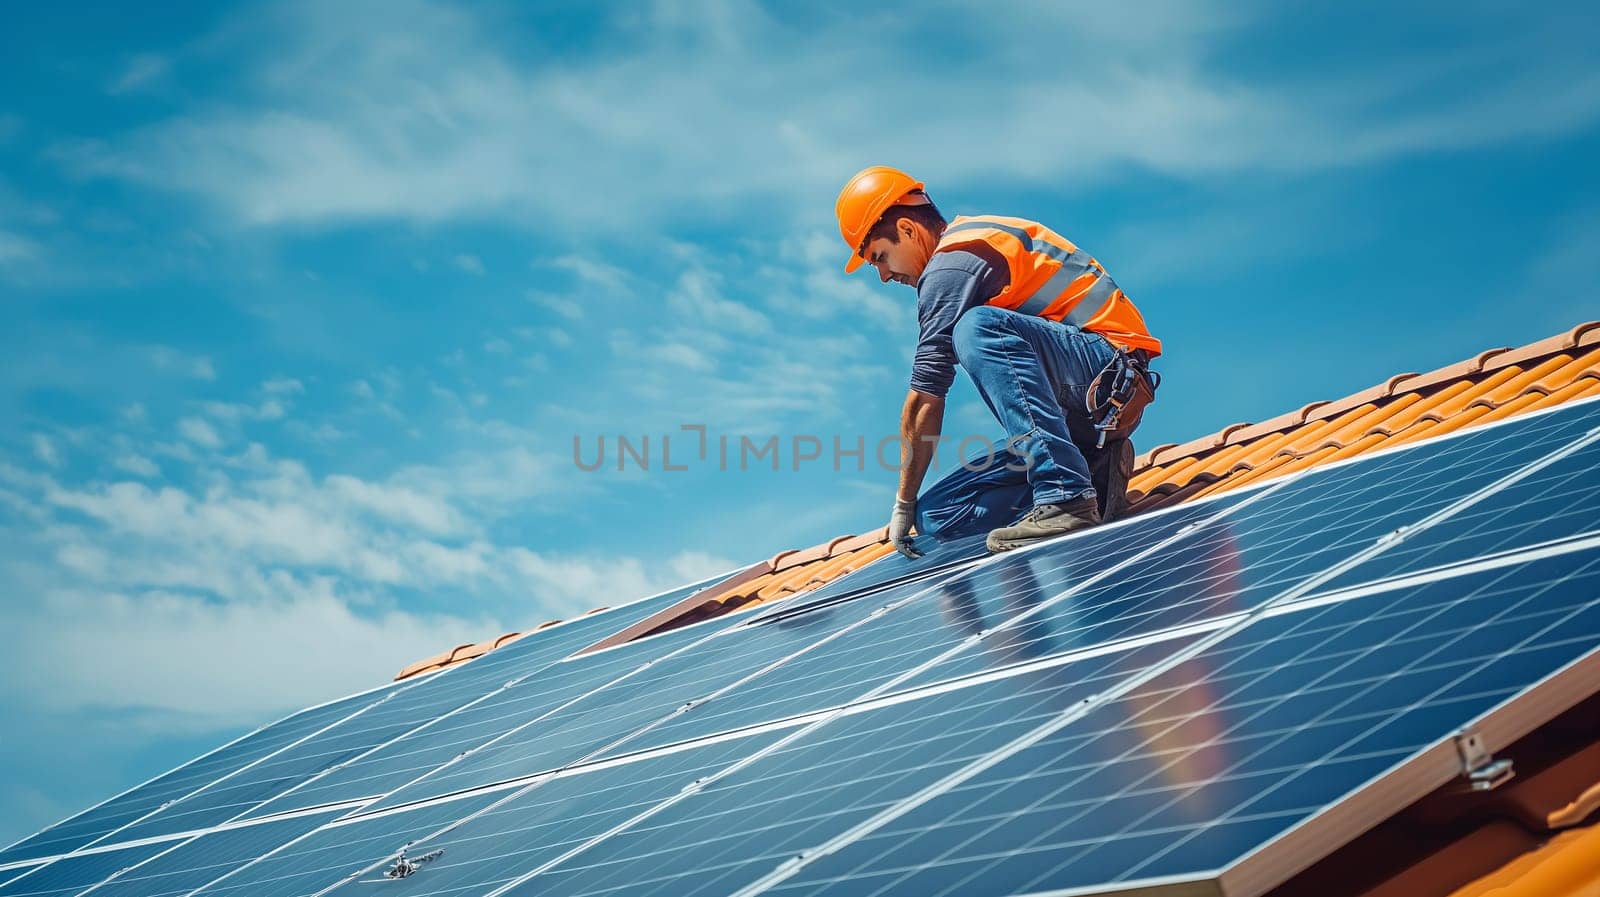 A technician in safety gear mounts solar panels on a house roof under a clear blue sky - Generative AI